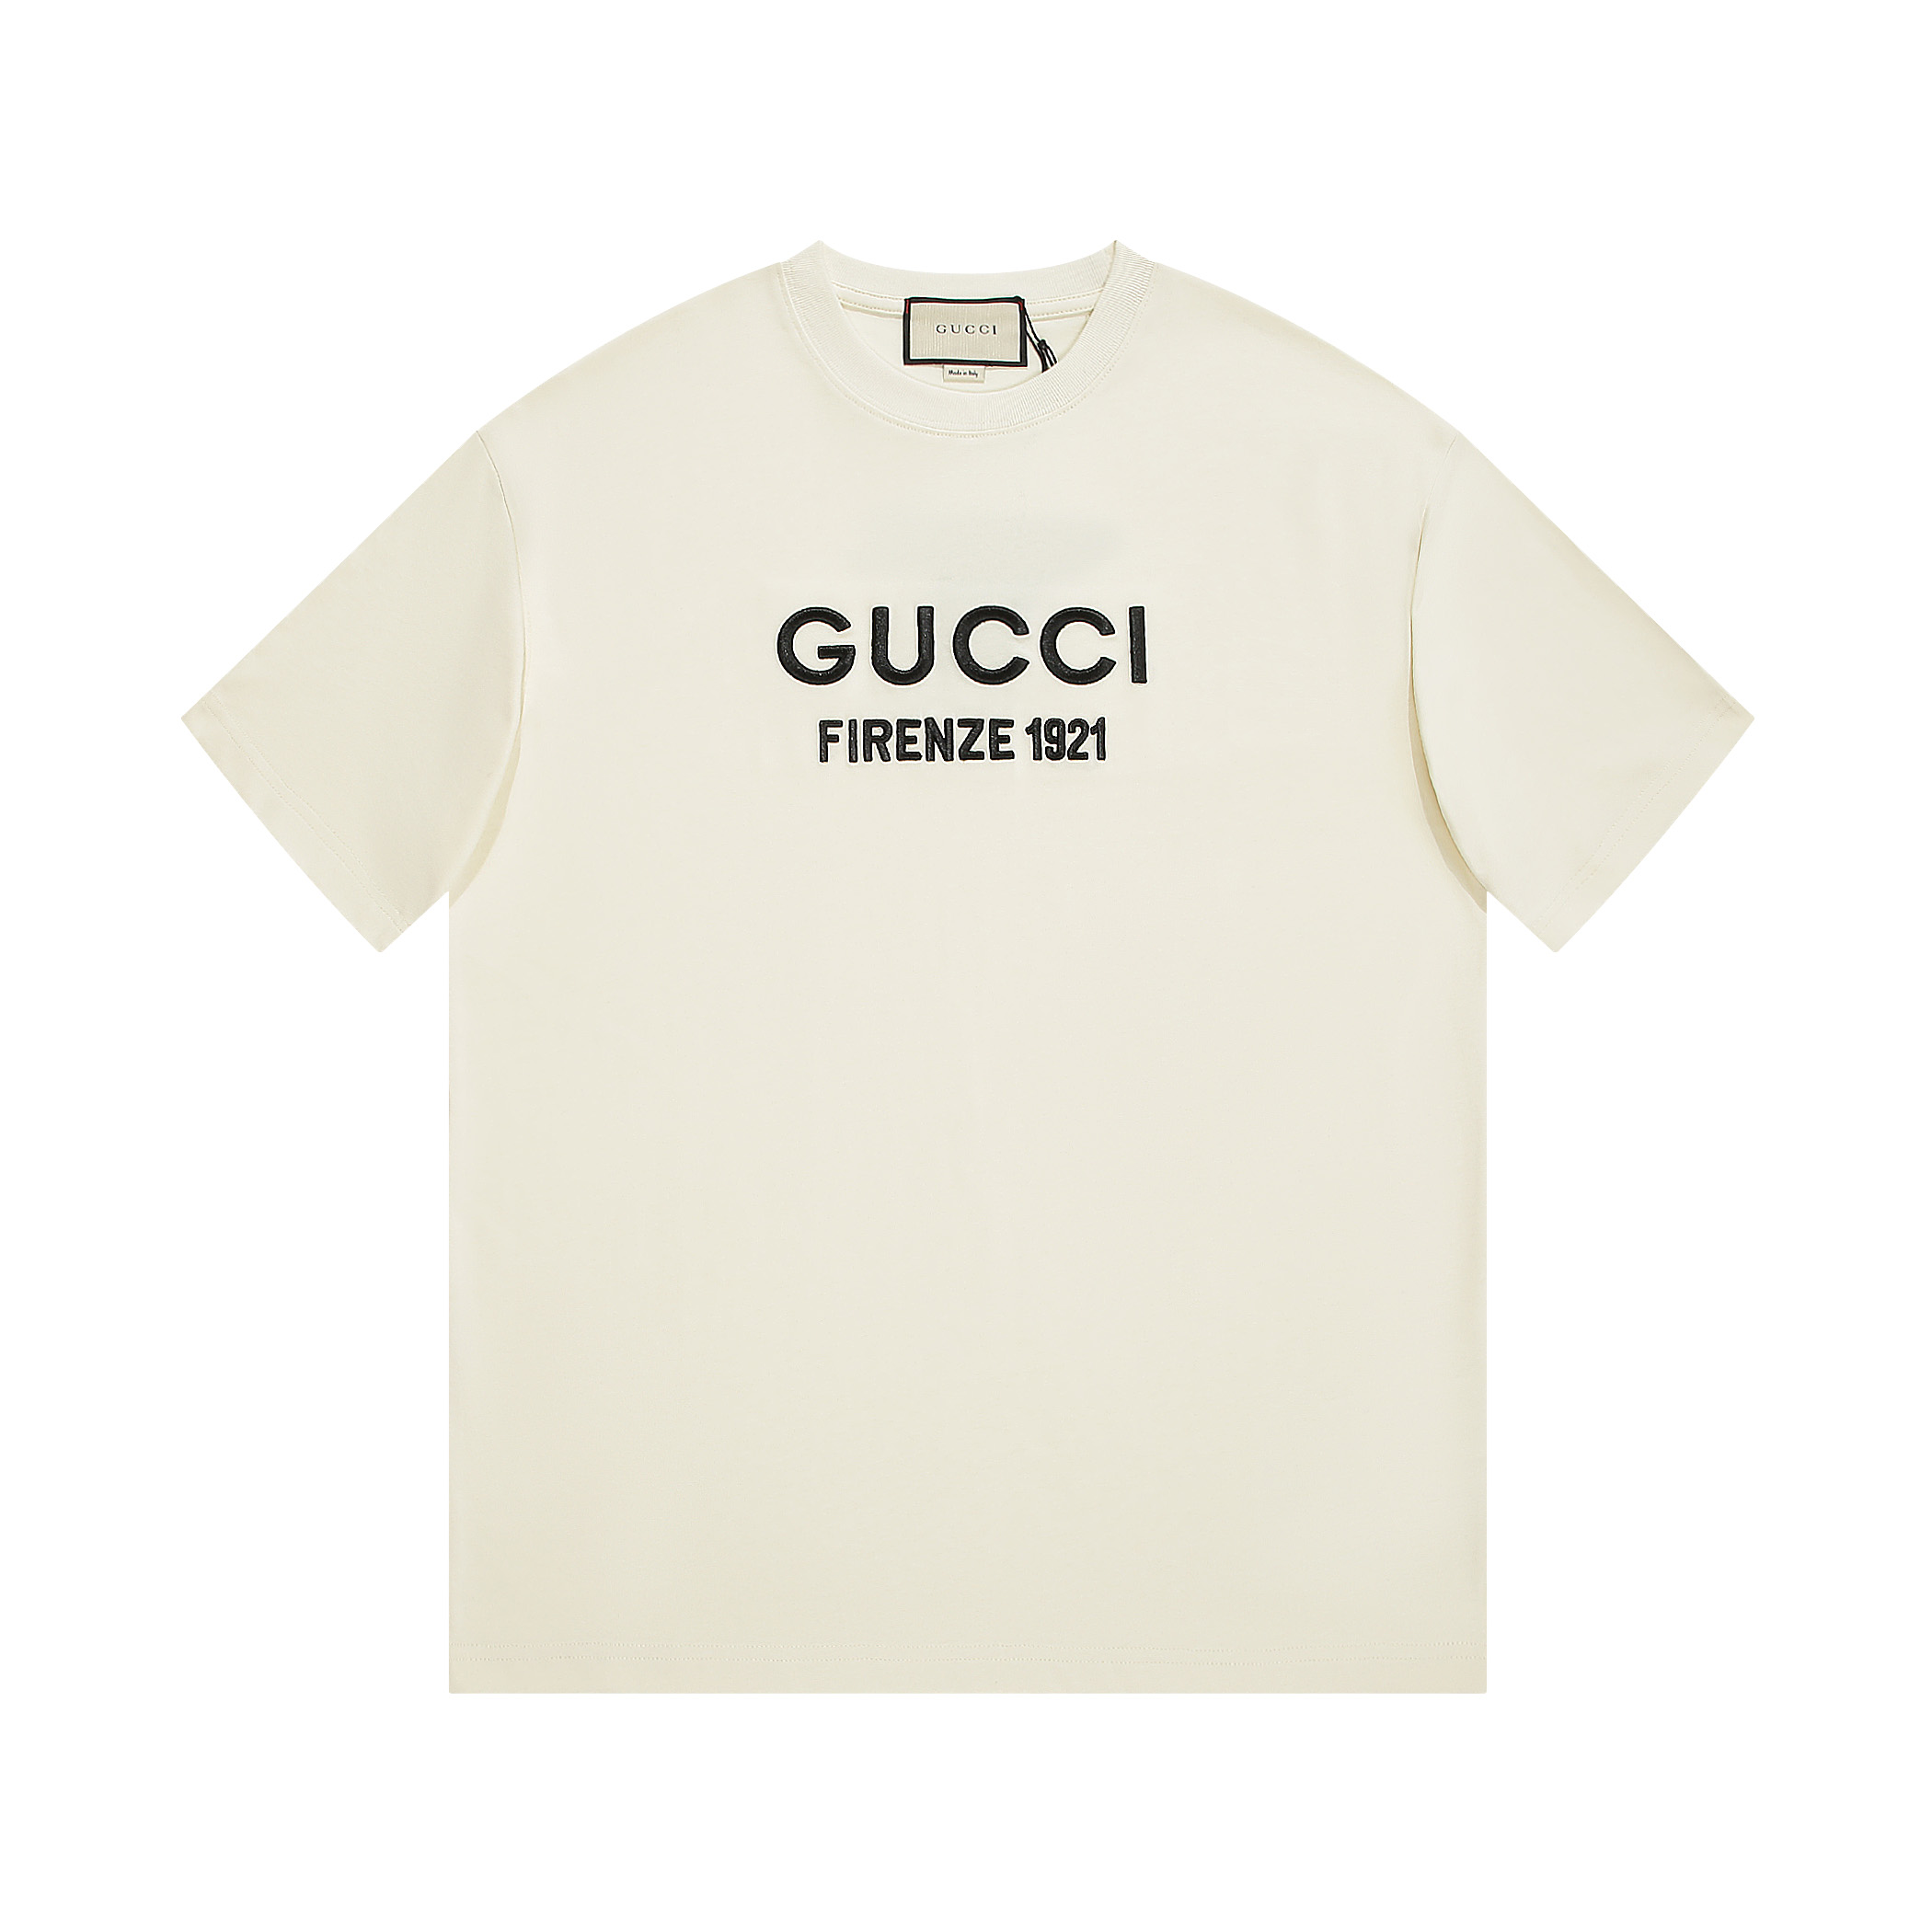 Gucci Clothing T-Shirt Top Quality Replica
 Apricot Color Black Embroidery Unisex Cotton Spring/Summer Collection Fashion Short Sleeve